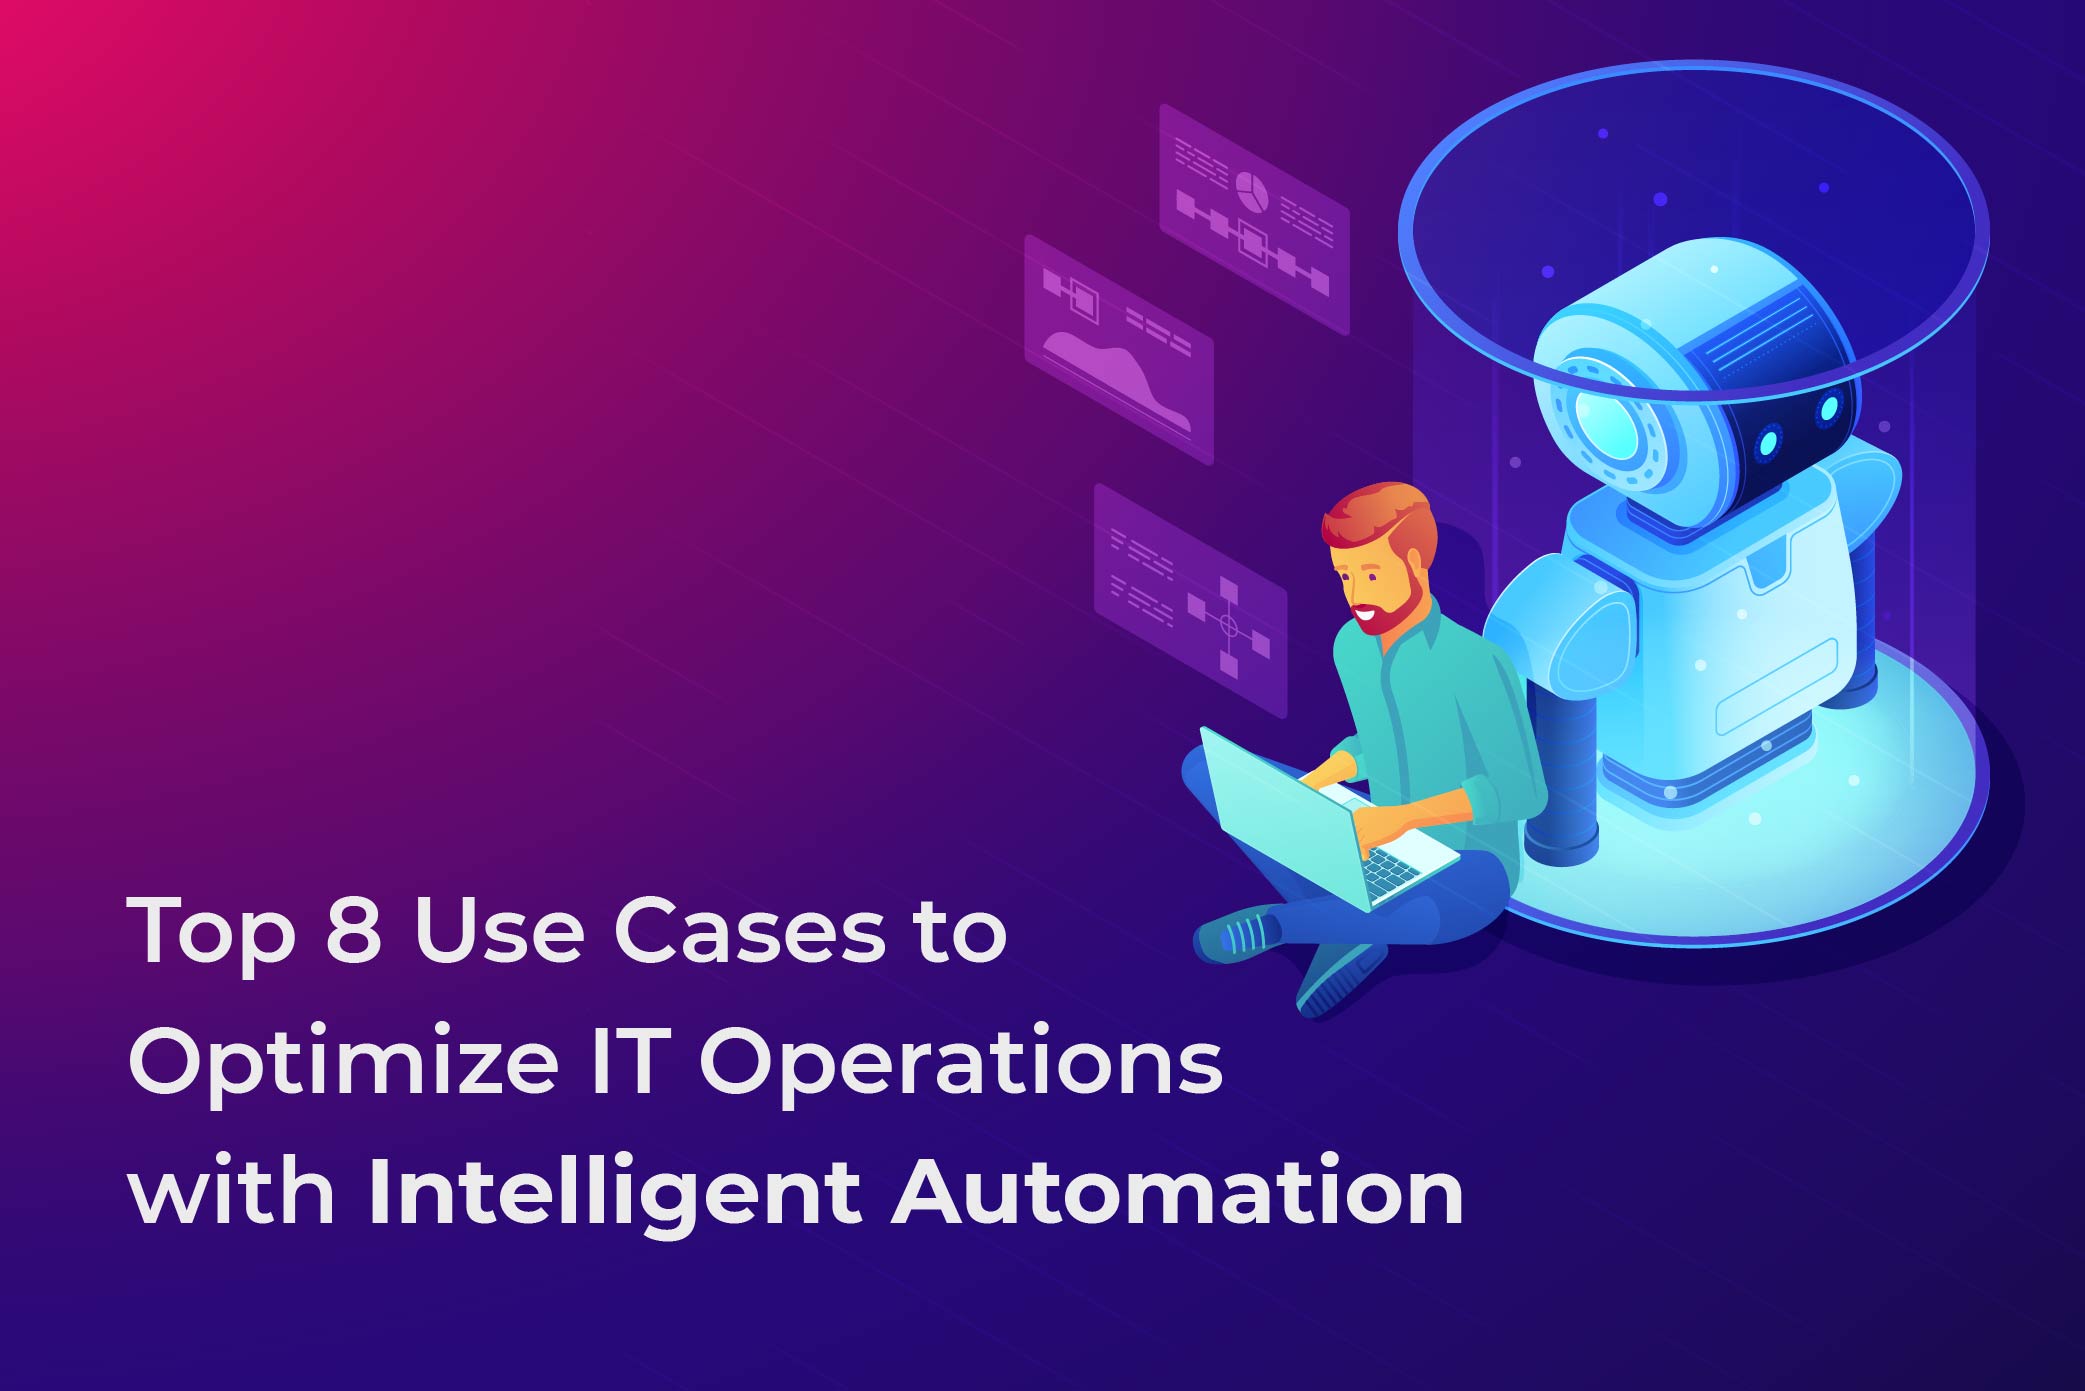 Top 8 Use Cases to Optimize IT Operations with Intelligent Automation